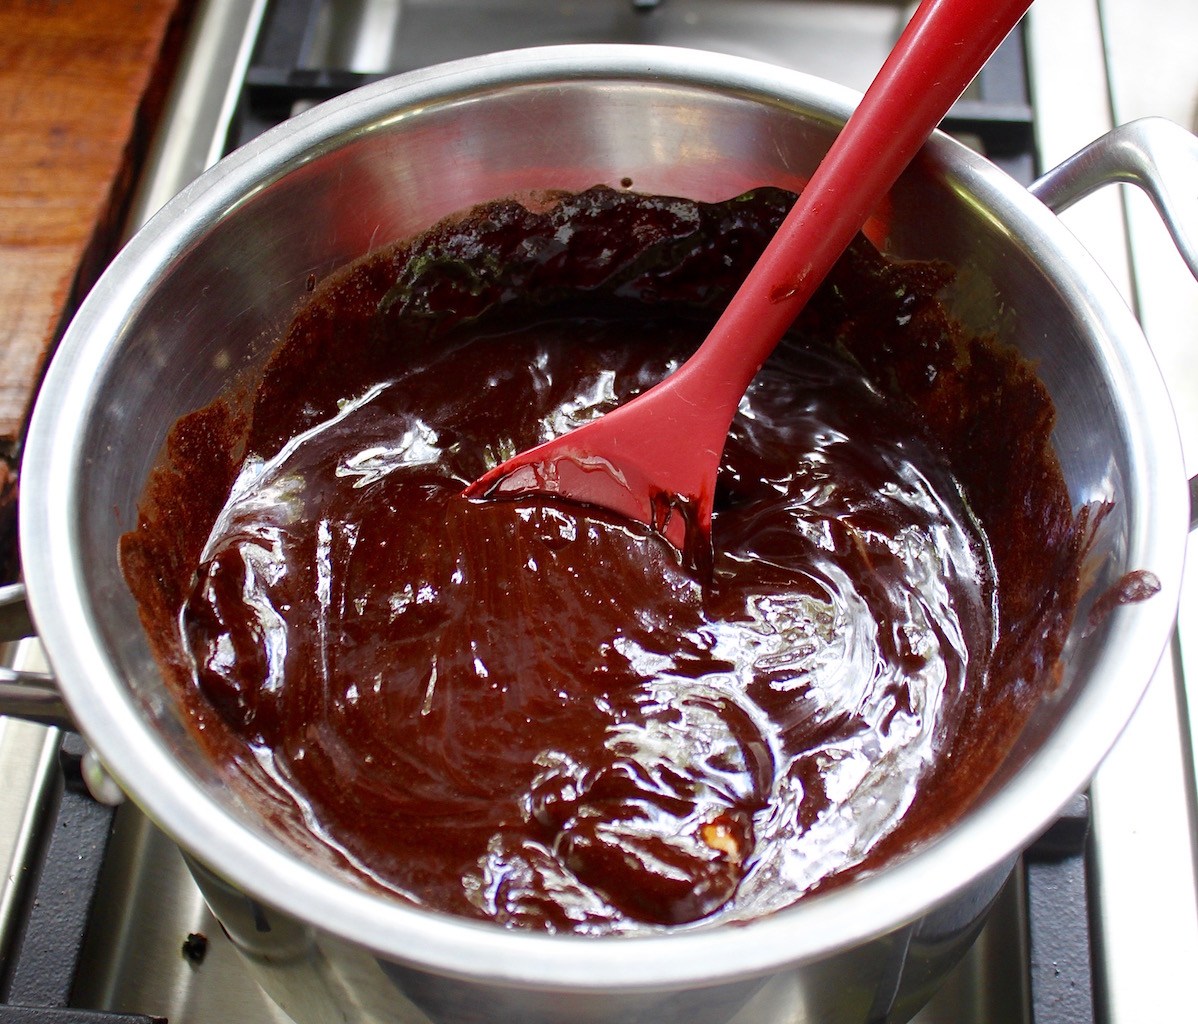 Melting the chocolate & butter in a homemade bain marie.